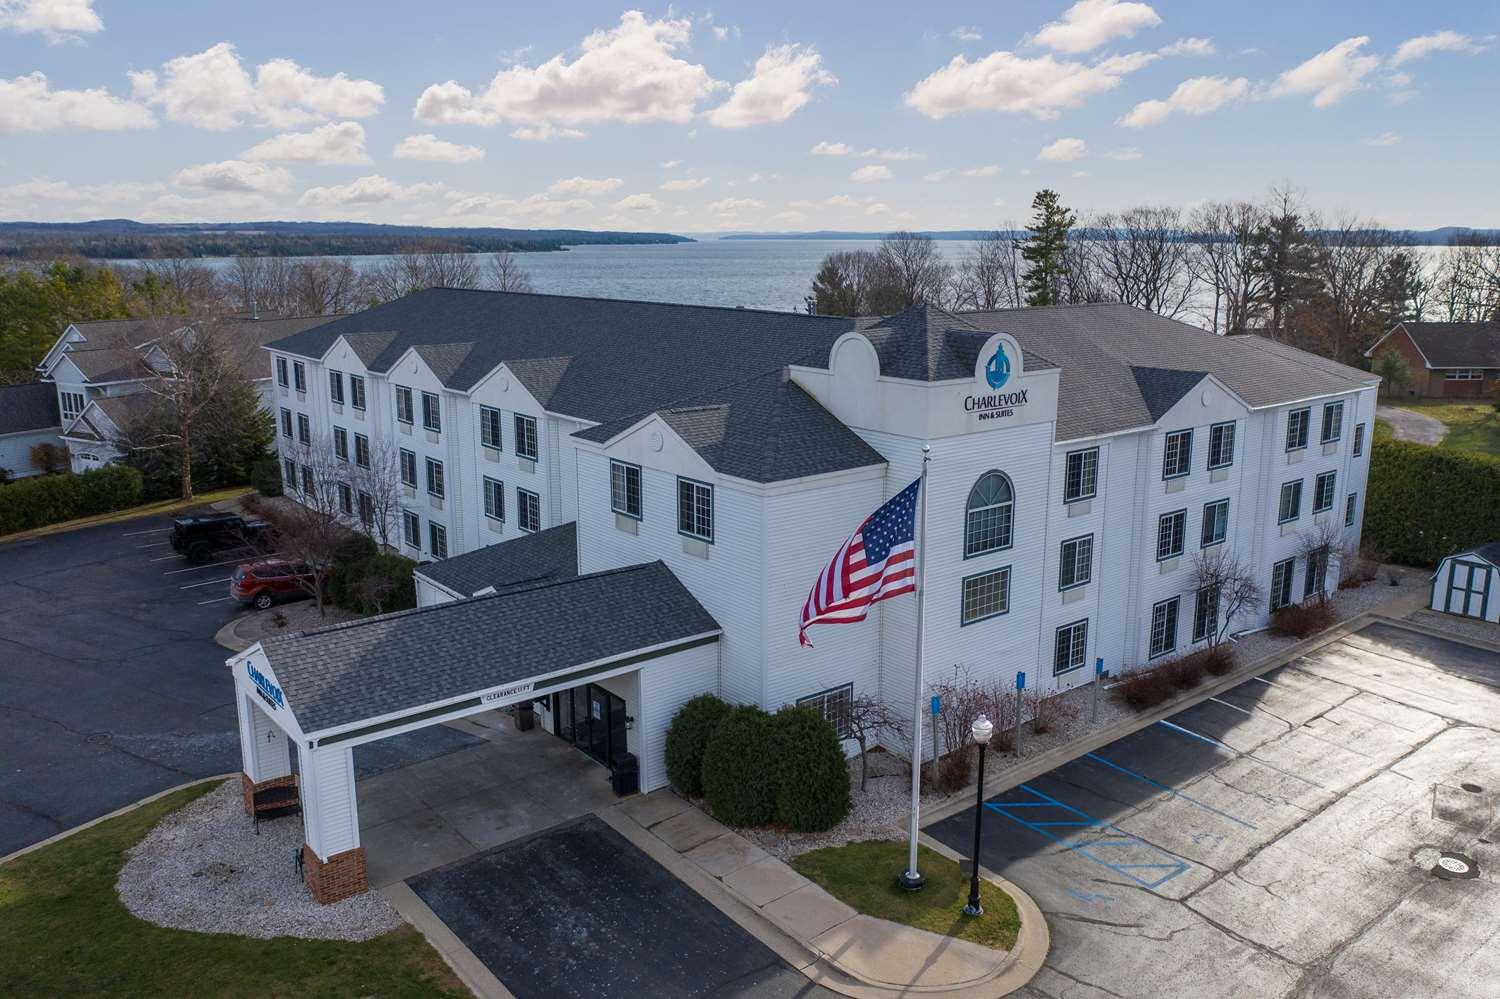 Charlevoix Inn & Suites Surestay Collection By Best Western Exterior photo